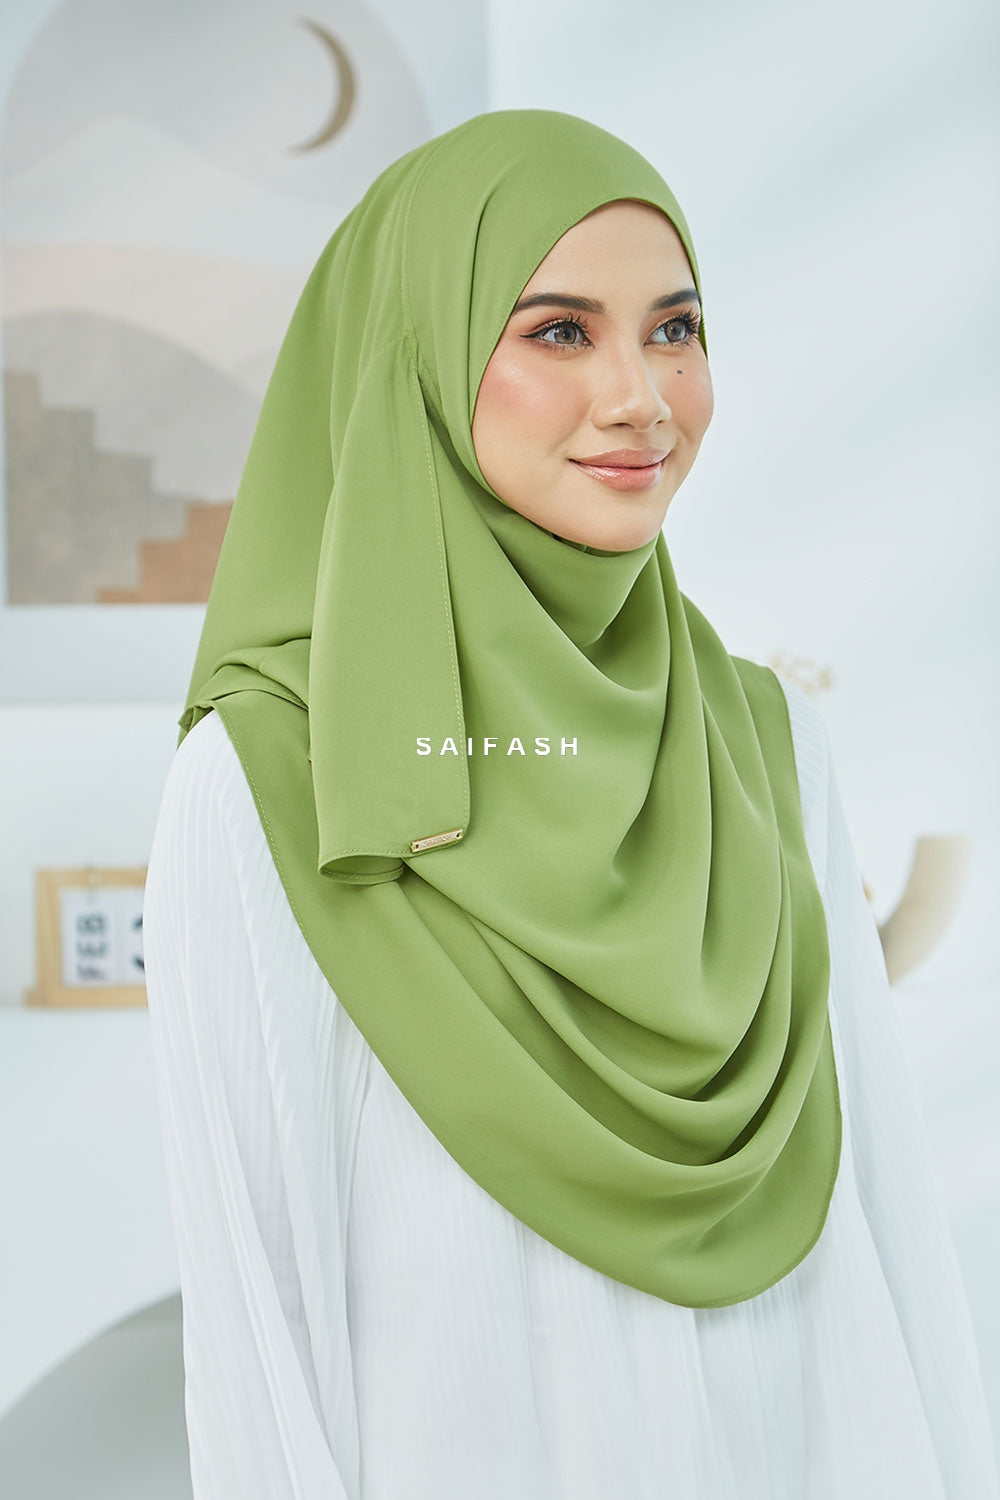 Aralyn Babes Instant Hijab in Pistachio